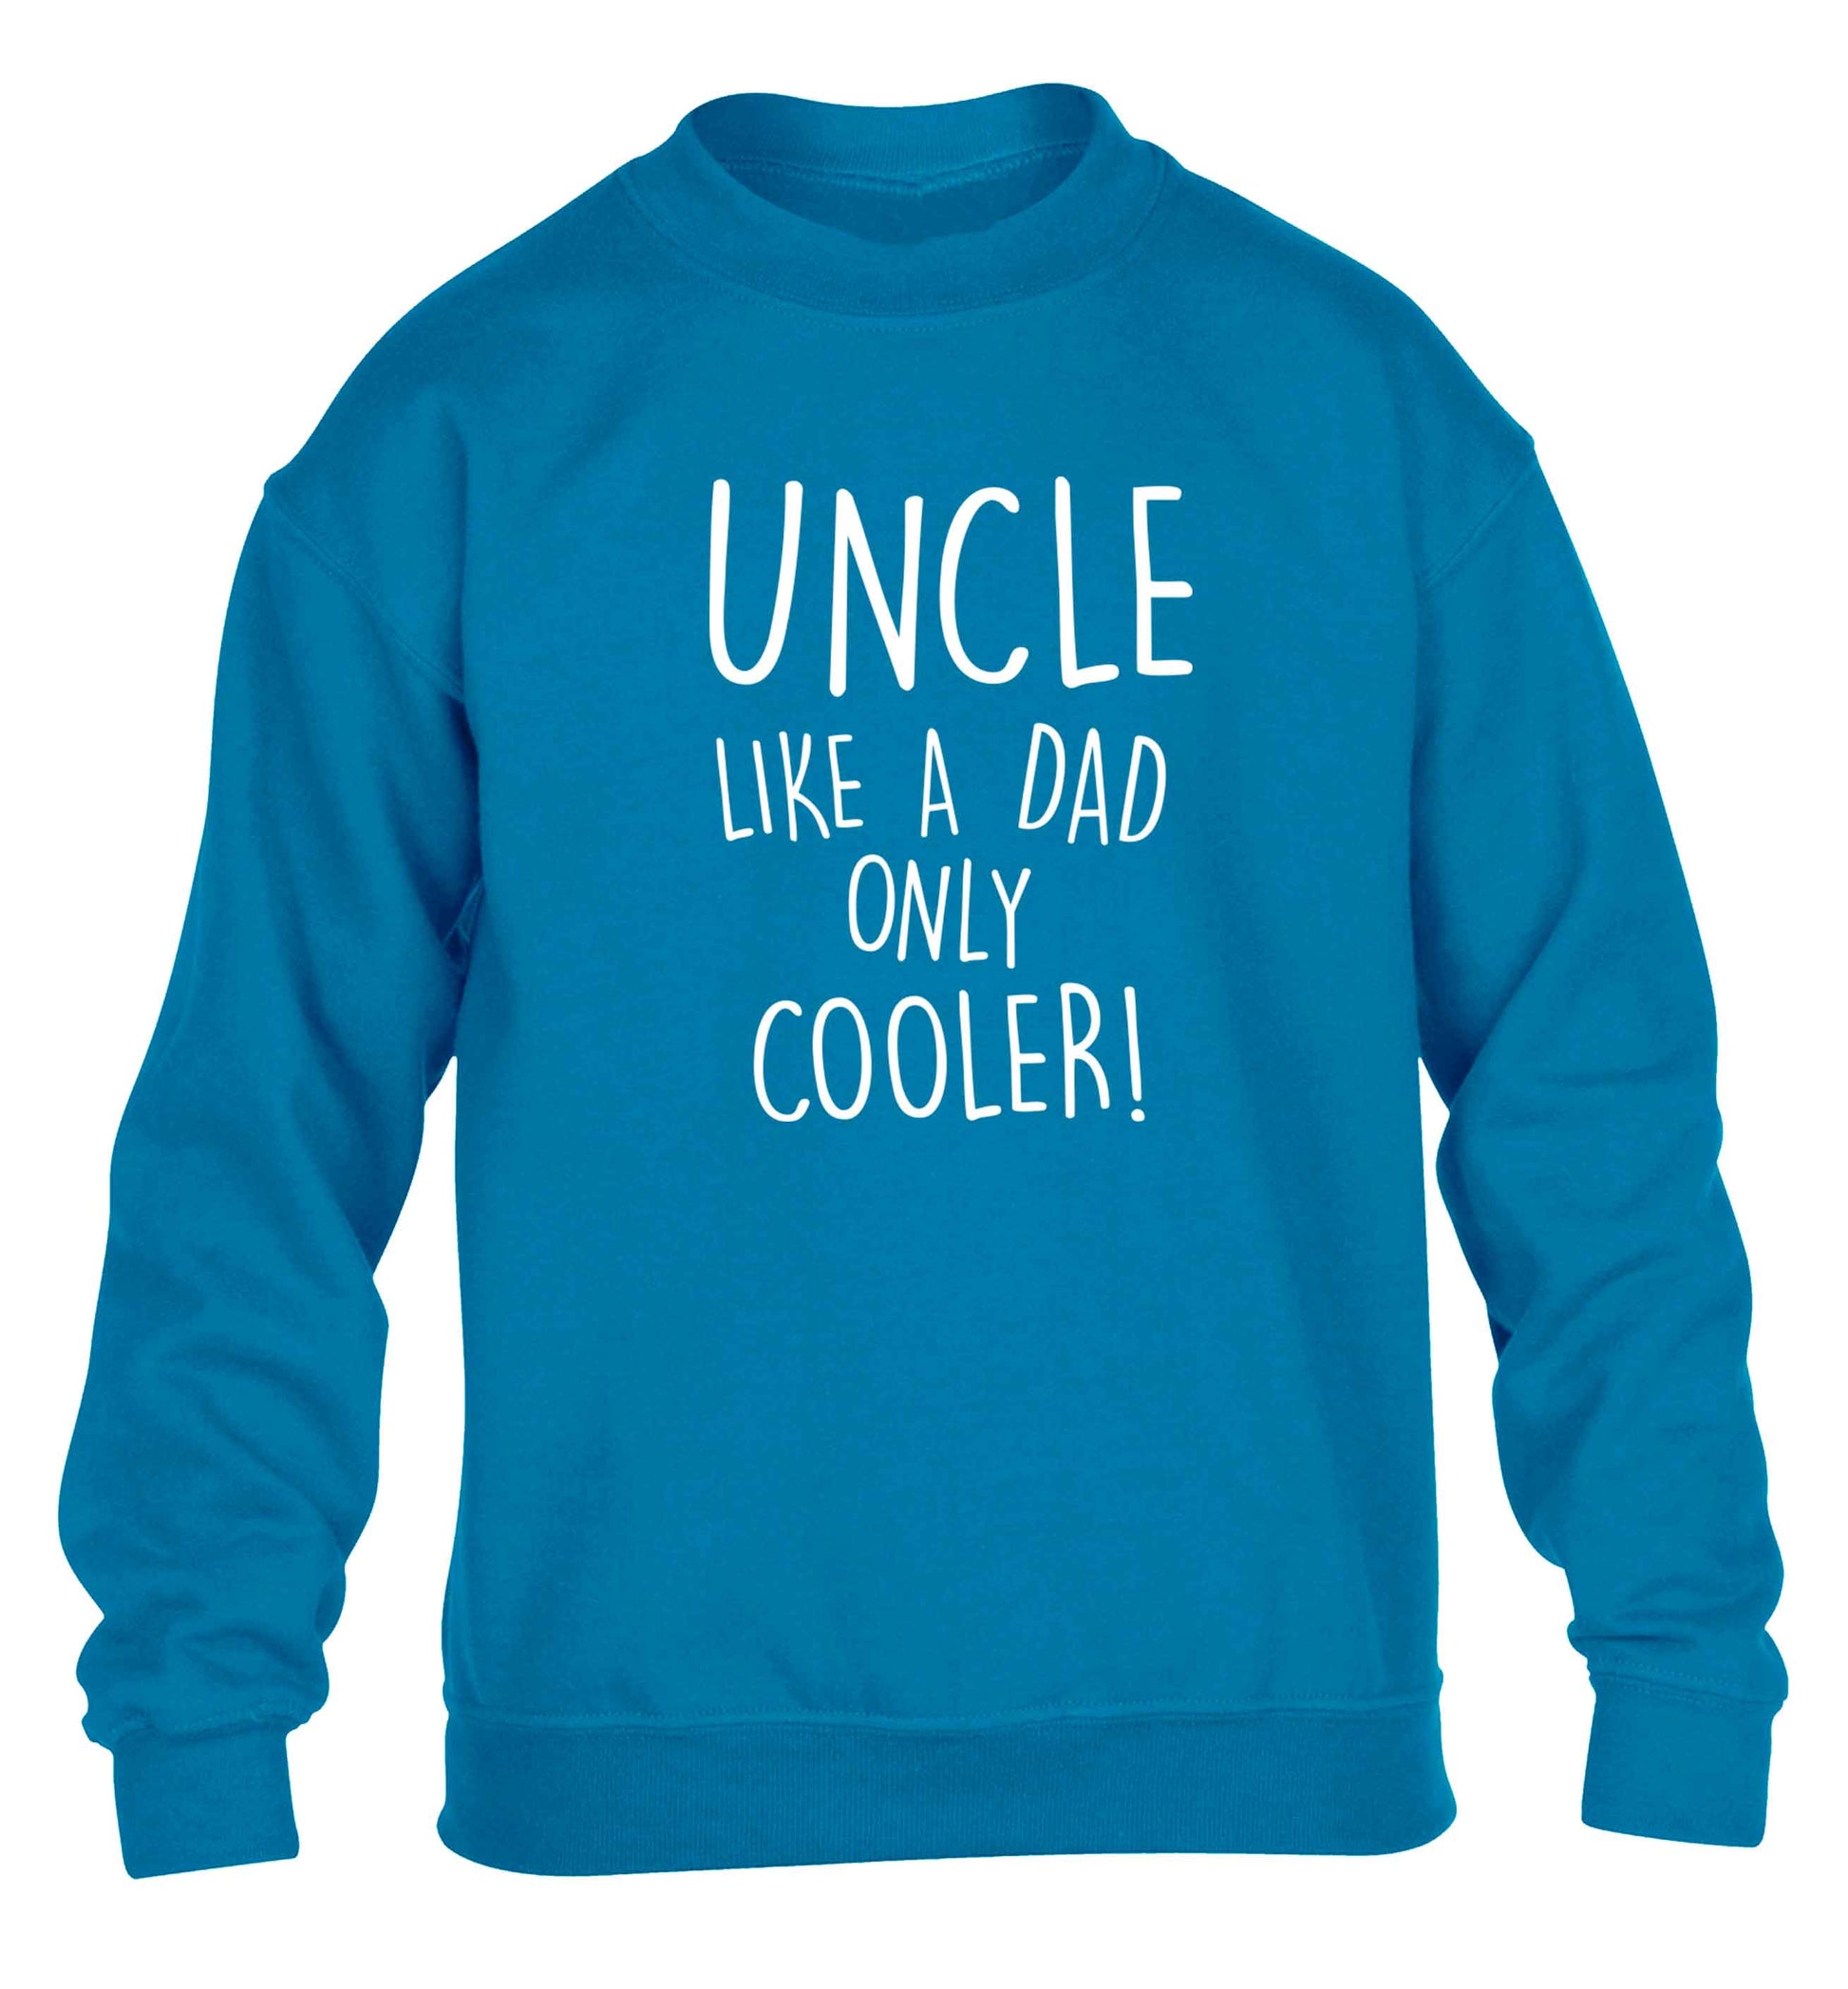 Uncle like a dad only cooler children's blue sweater 12-13 Years